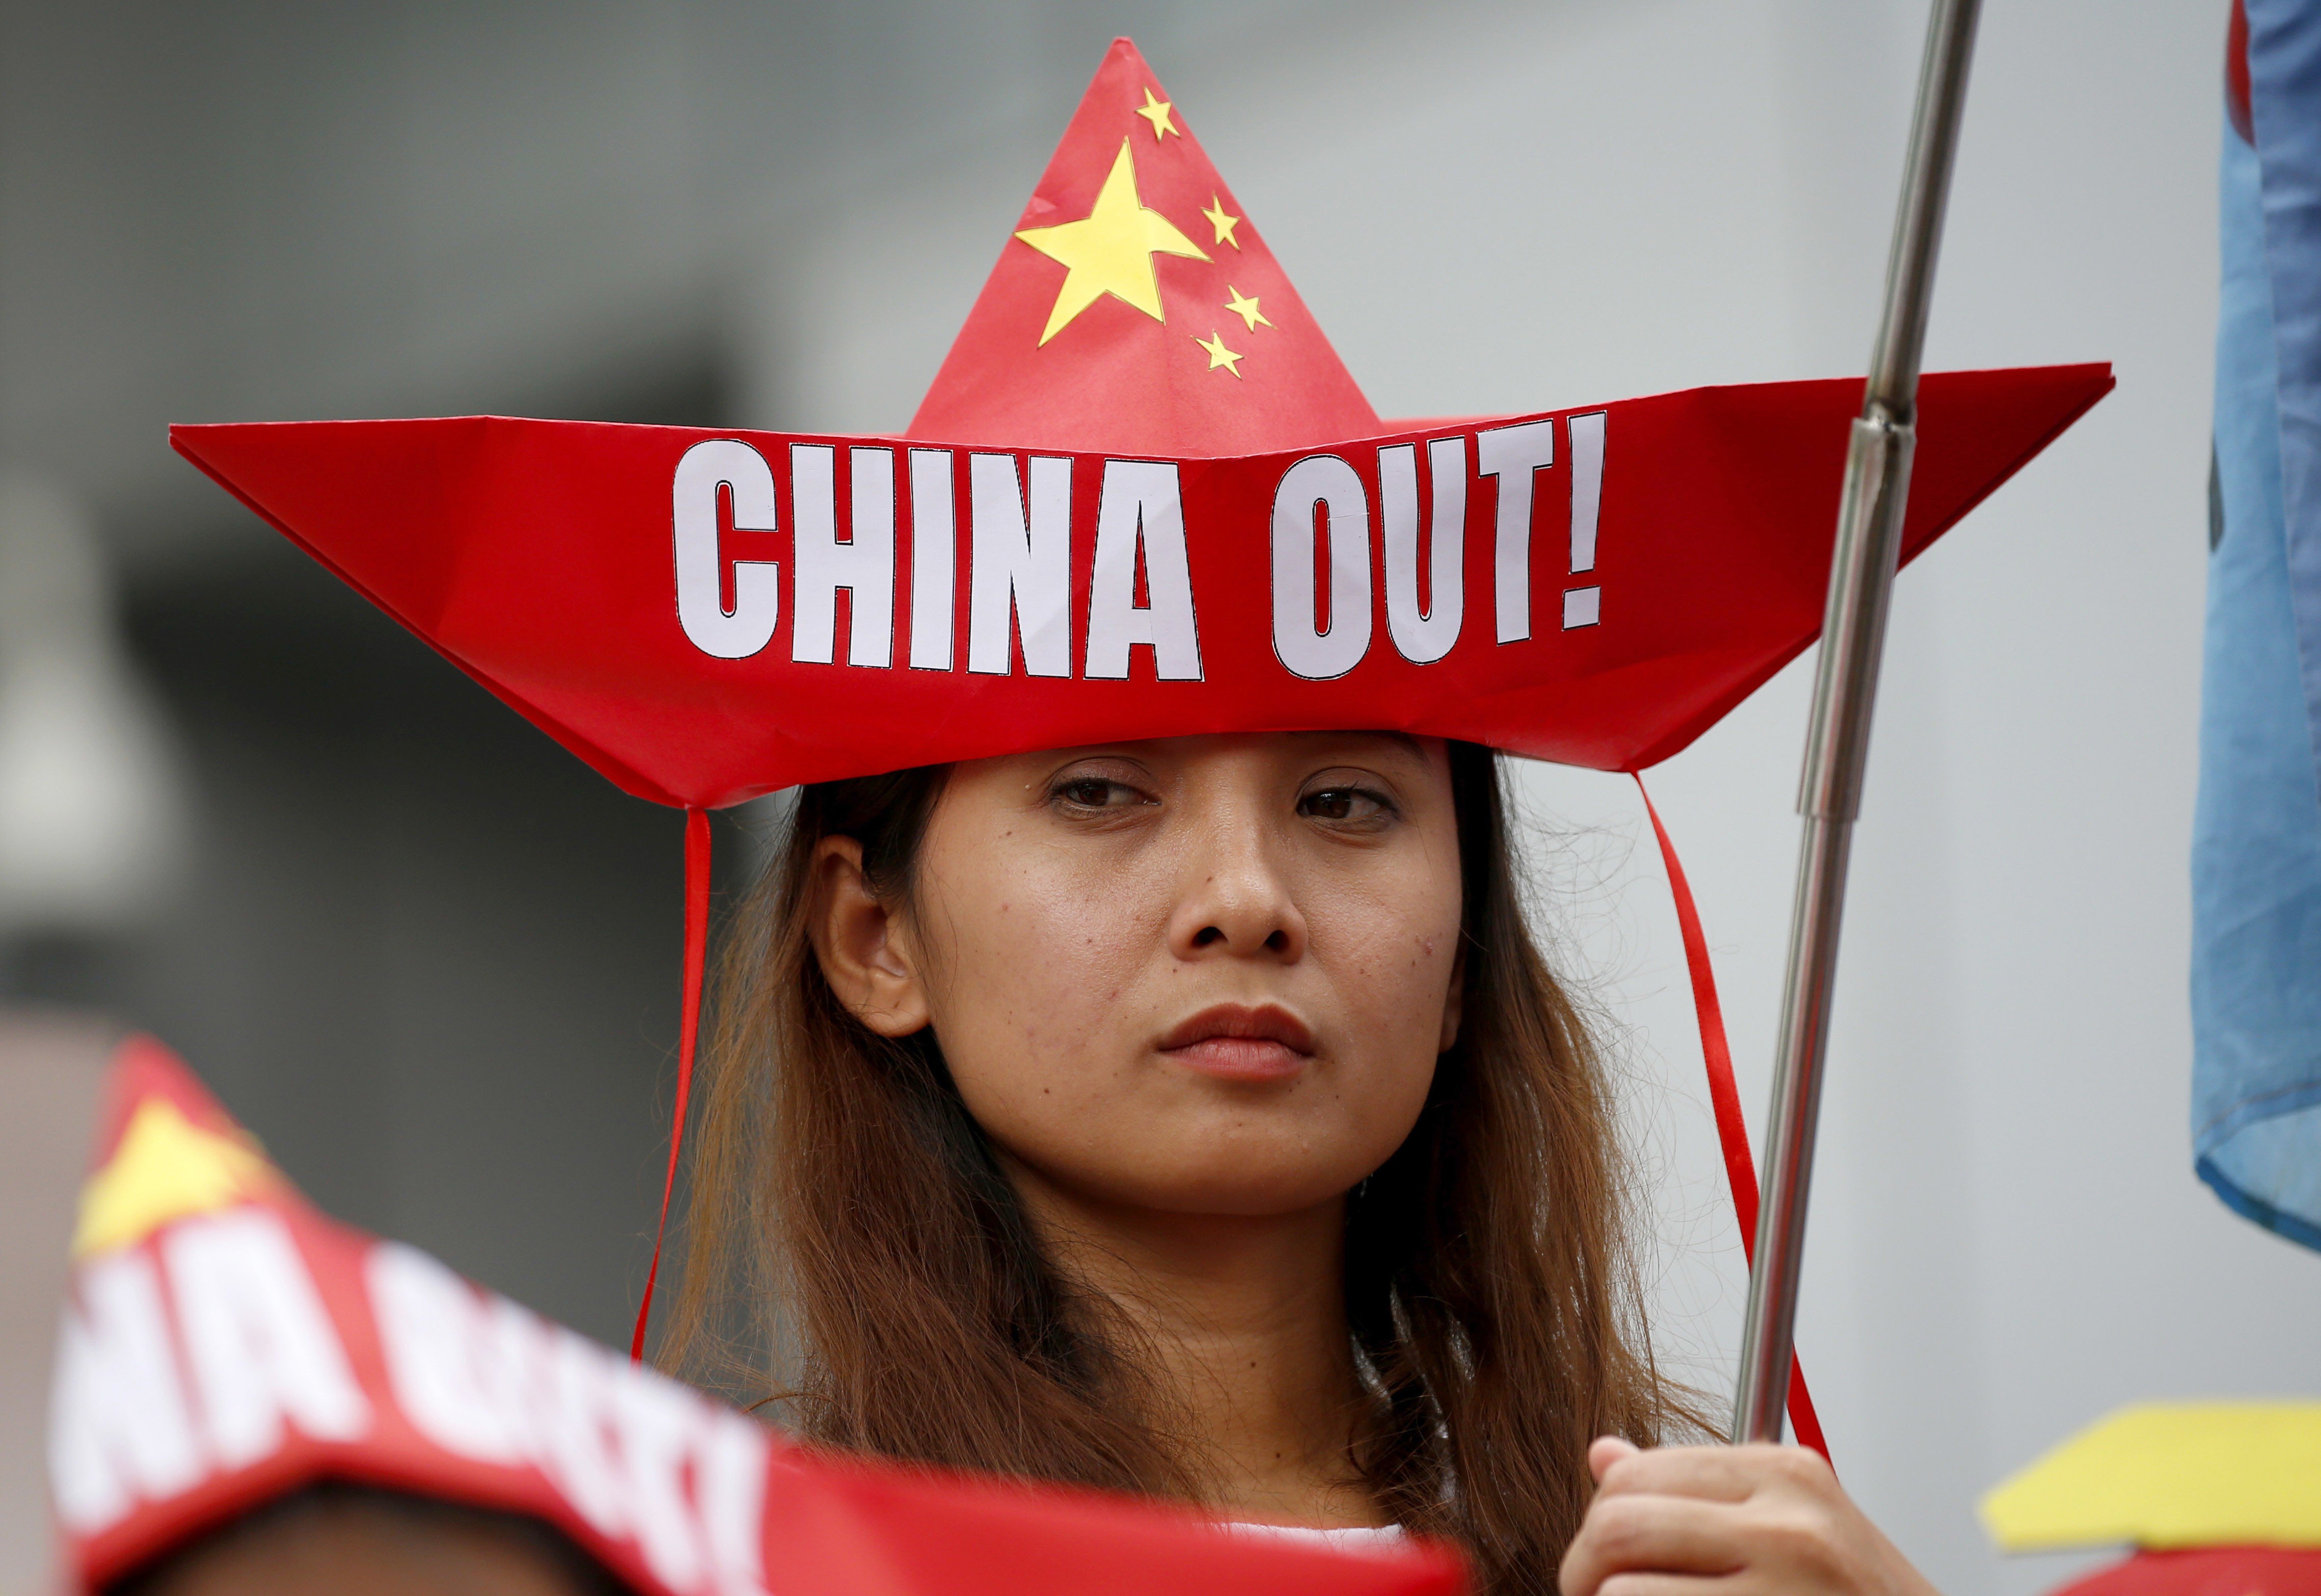 A Philippine protester, wearing a boat-shaped hat, demonstrates against China’s military moves in the South China Sea. Photo: AP